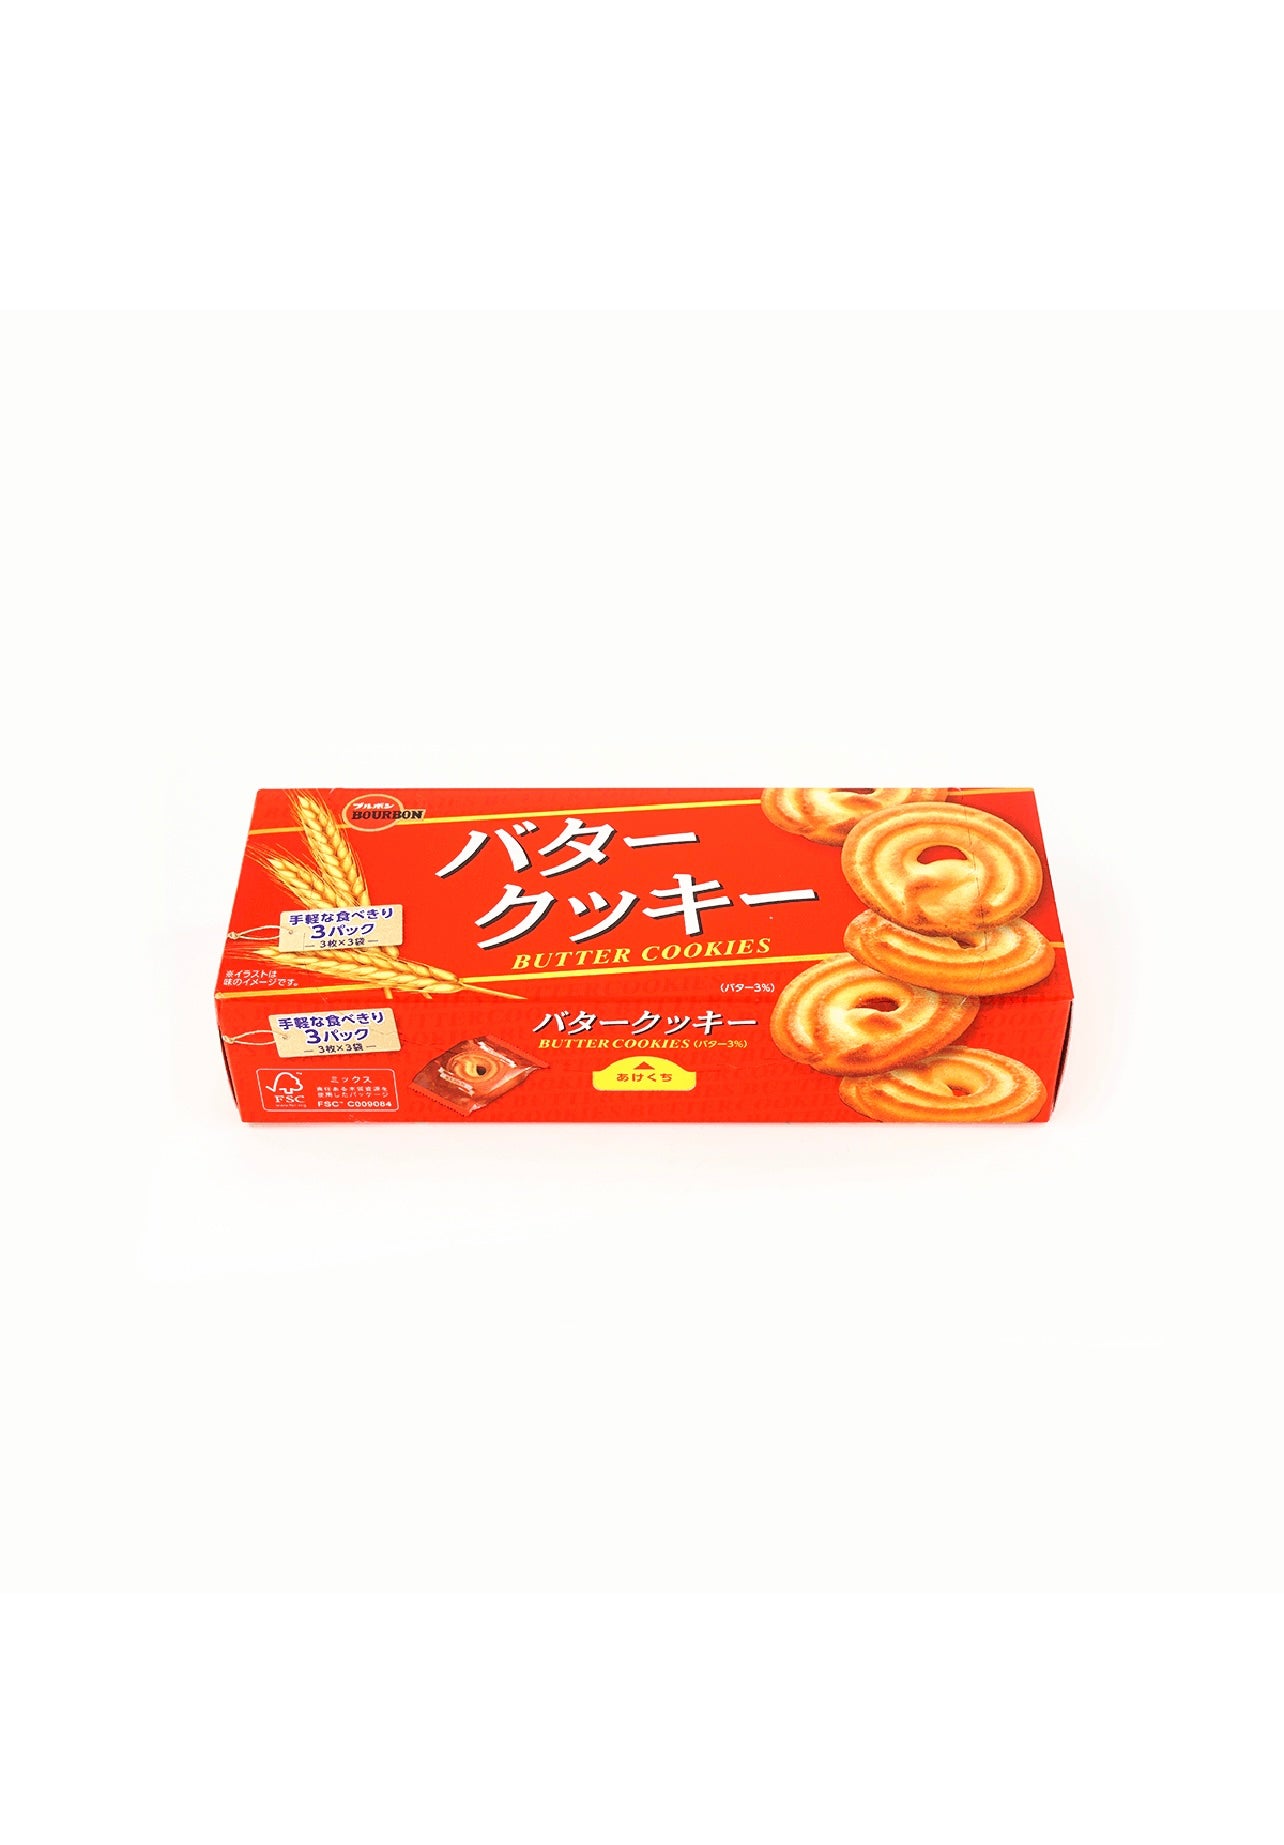 Japanese Butter Shortbread Cookies Snack, 3.17 OZ